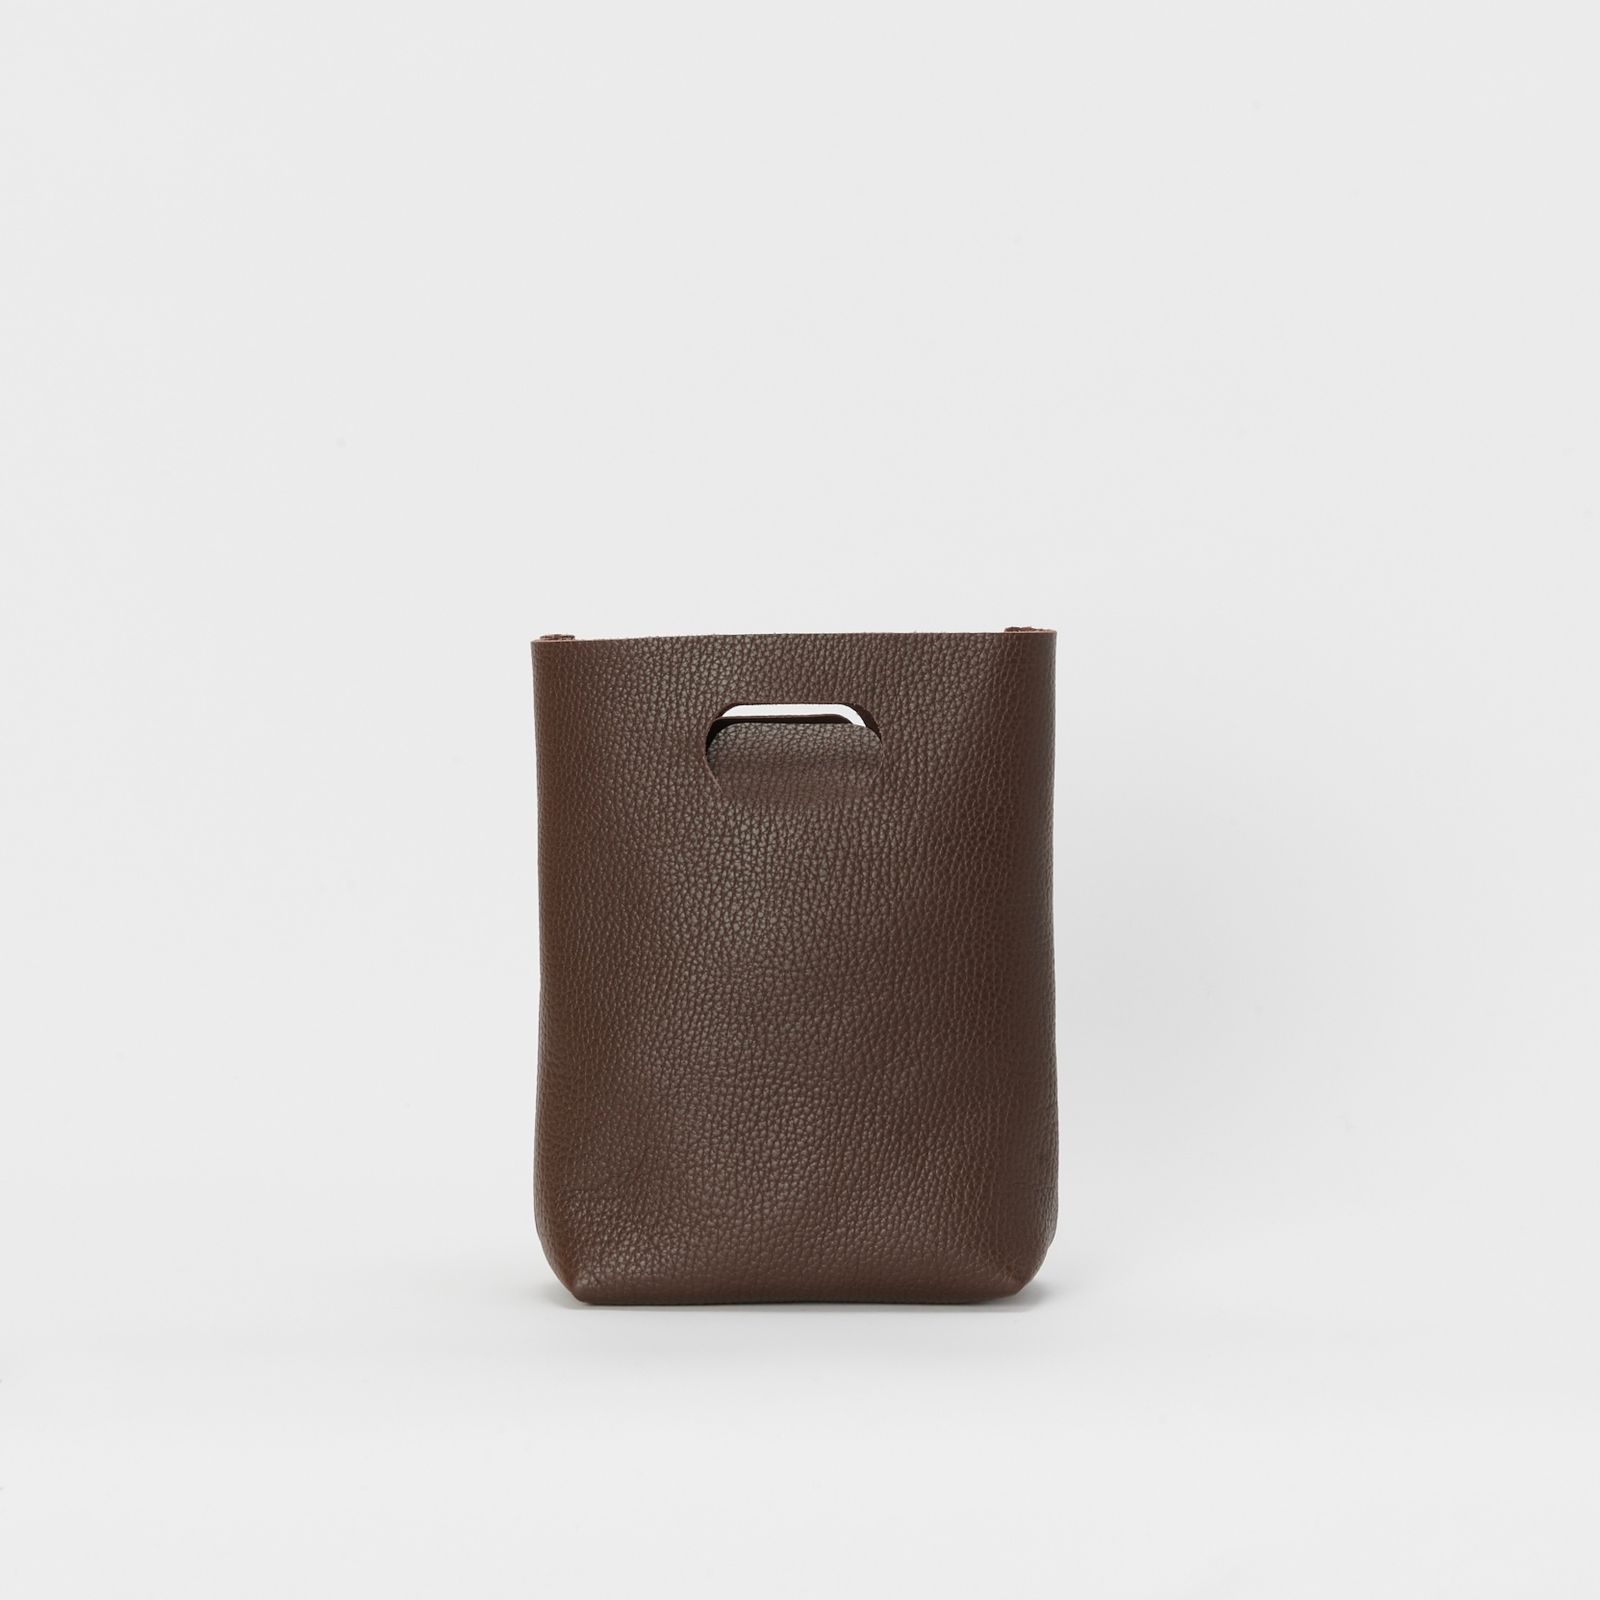 Hender Scheme - 【残りわずか】Not Eco Bag Small(TAUPE) | ACRMTSM 